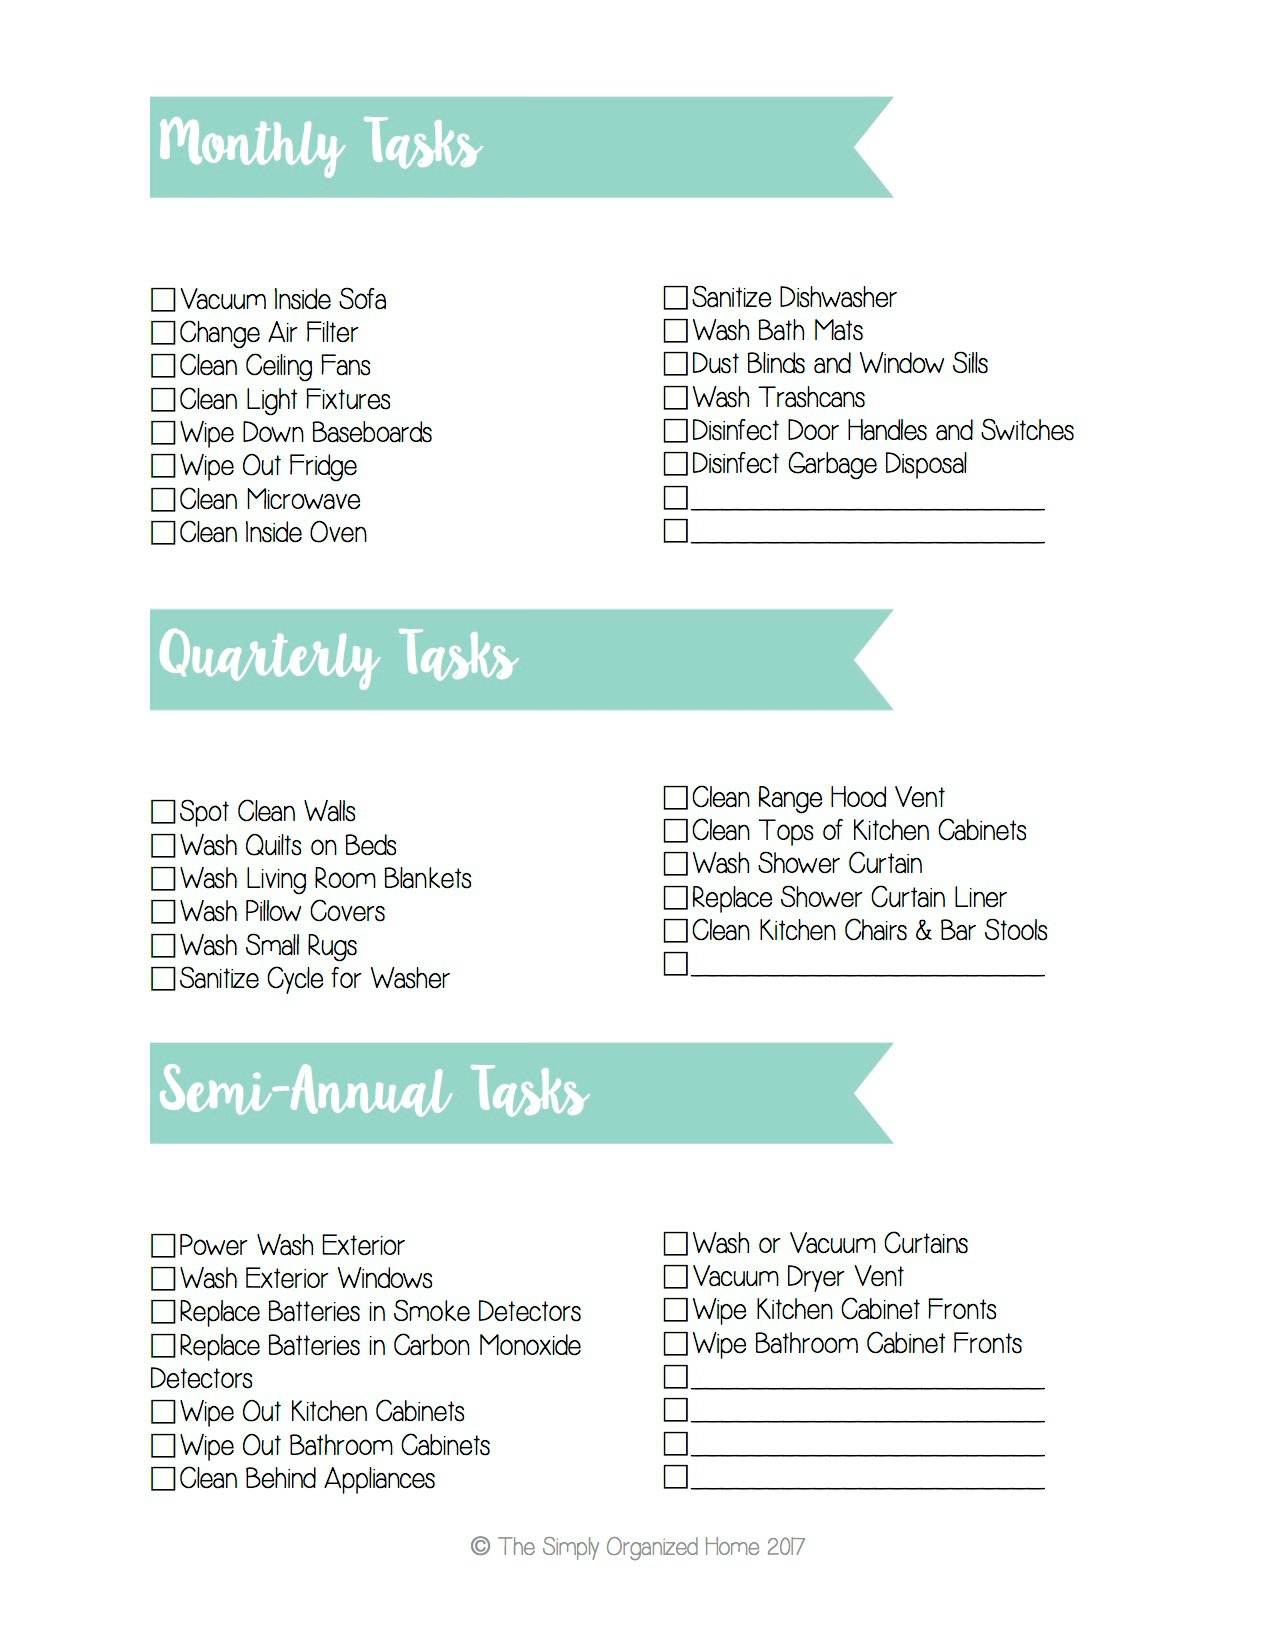 Monthly, Quarterly, and Semi-Annual Cleaning Checklists 2 - The